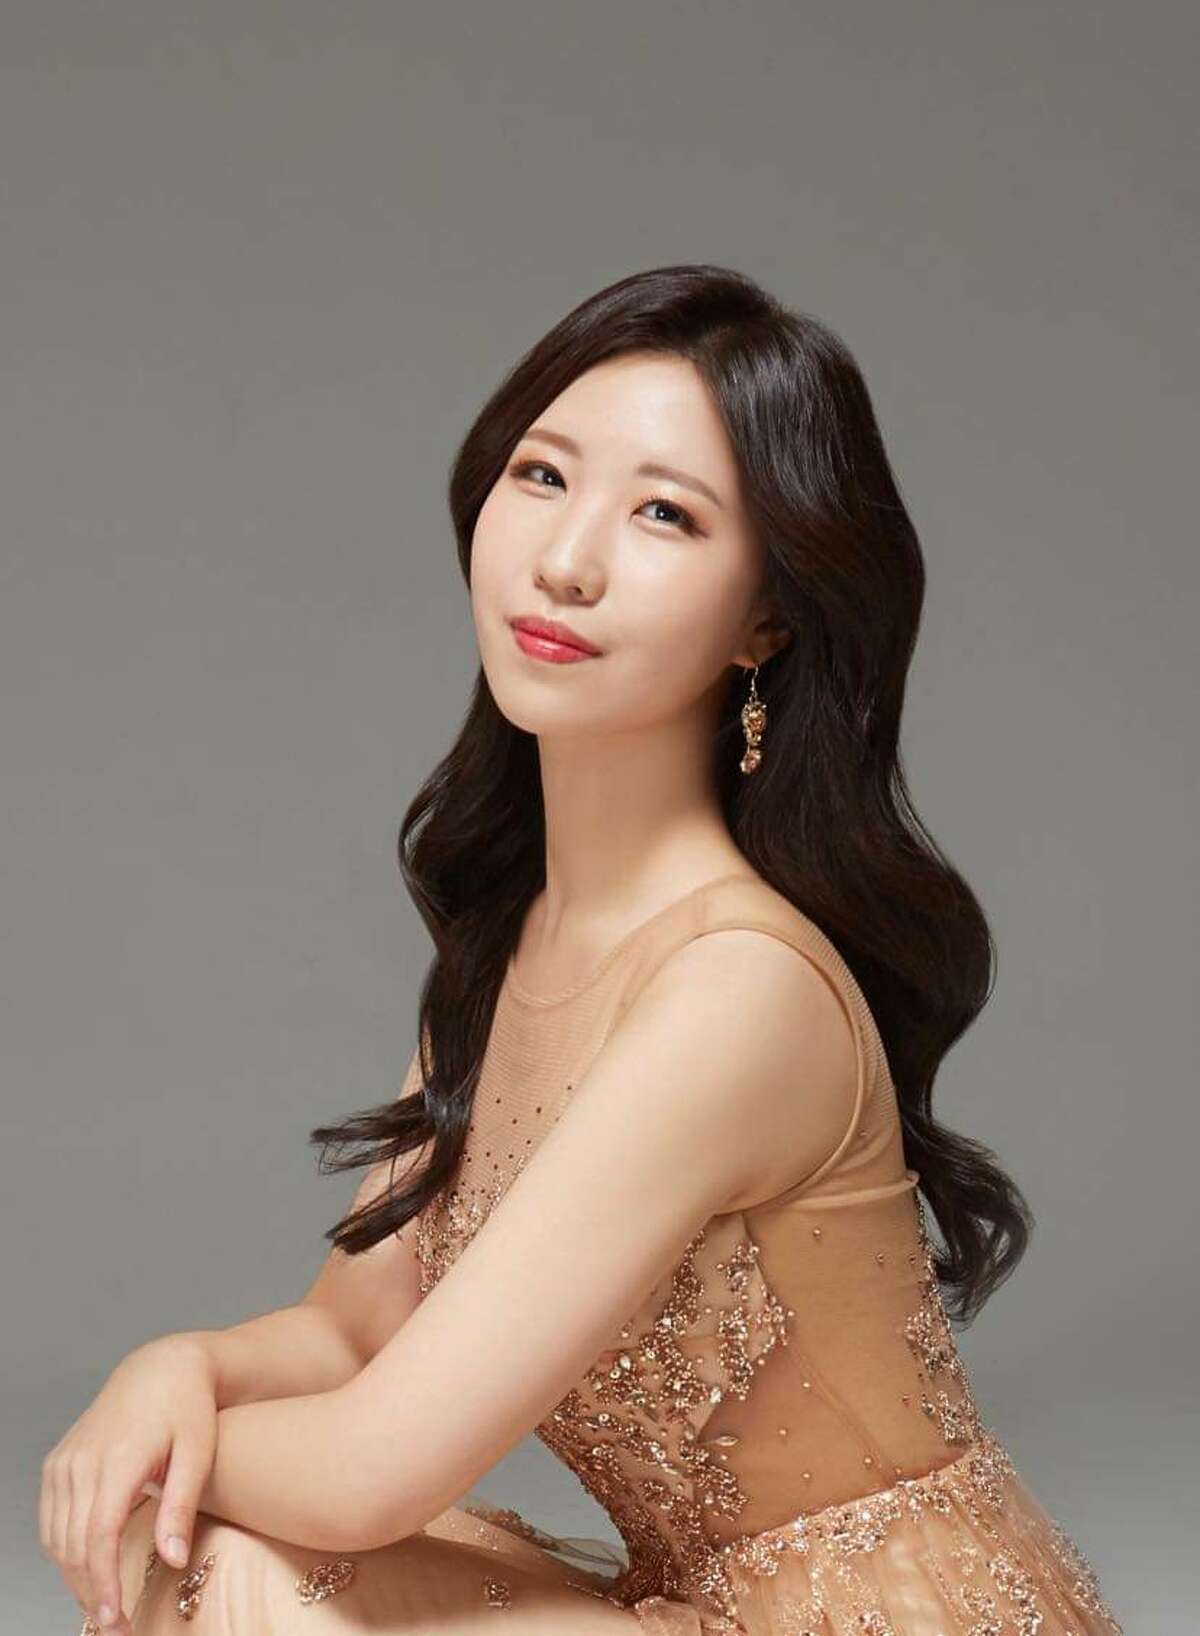 Soojin Kim is an MSU pianist currently working towards a doctorate in music, who will be joining the SiP Duo for a concert in Big Rapids.